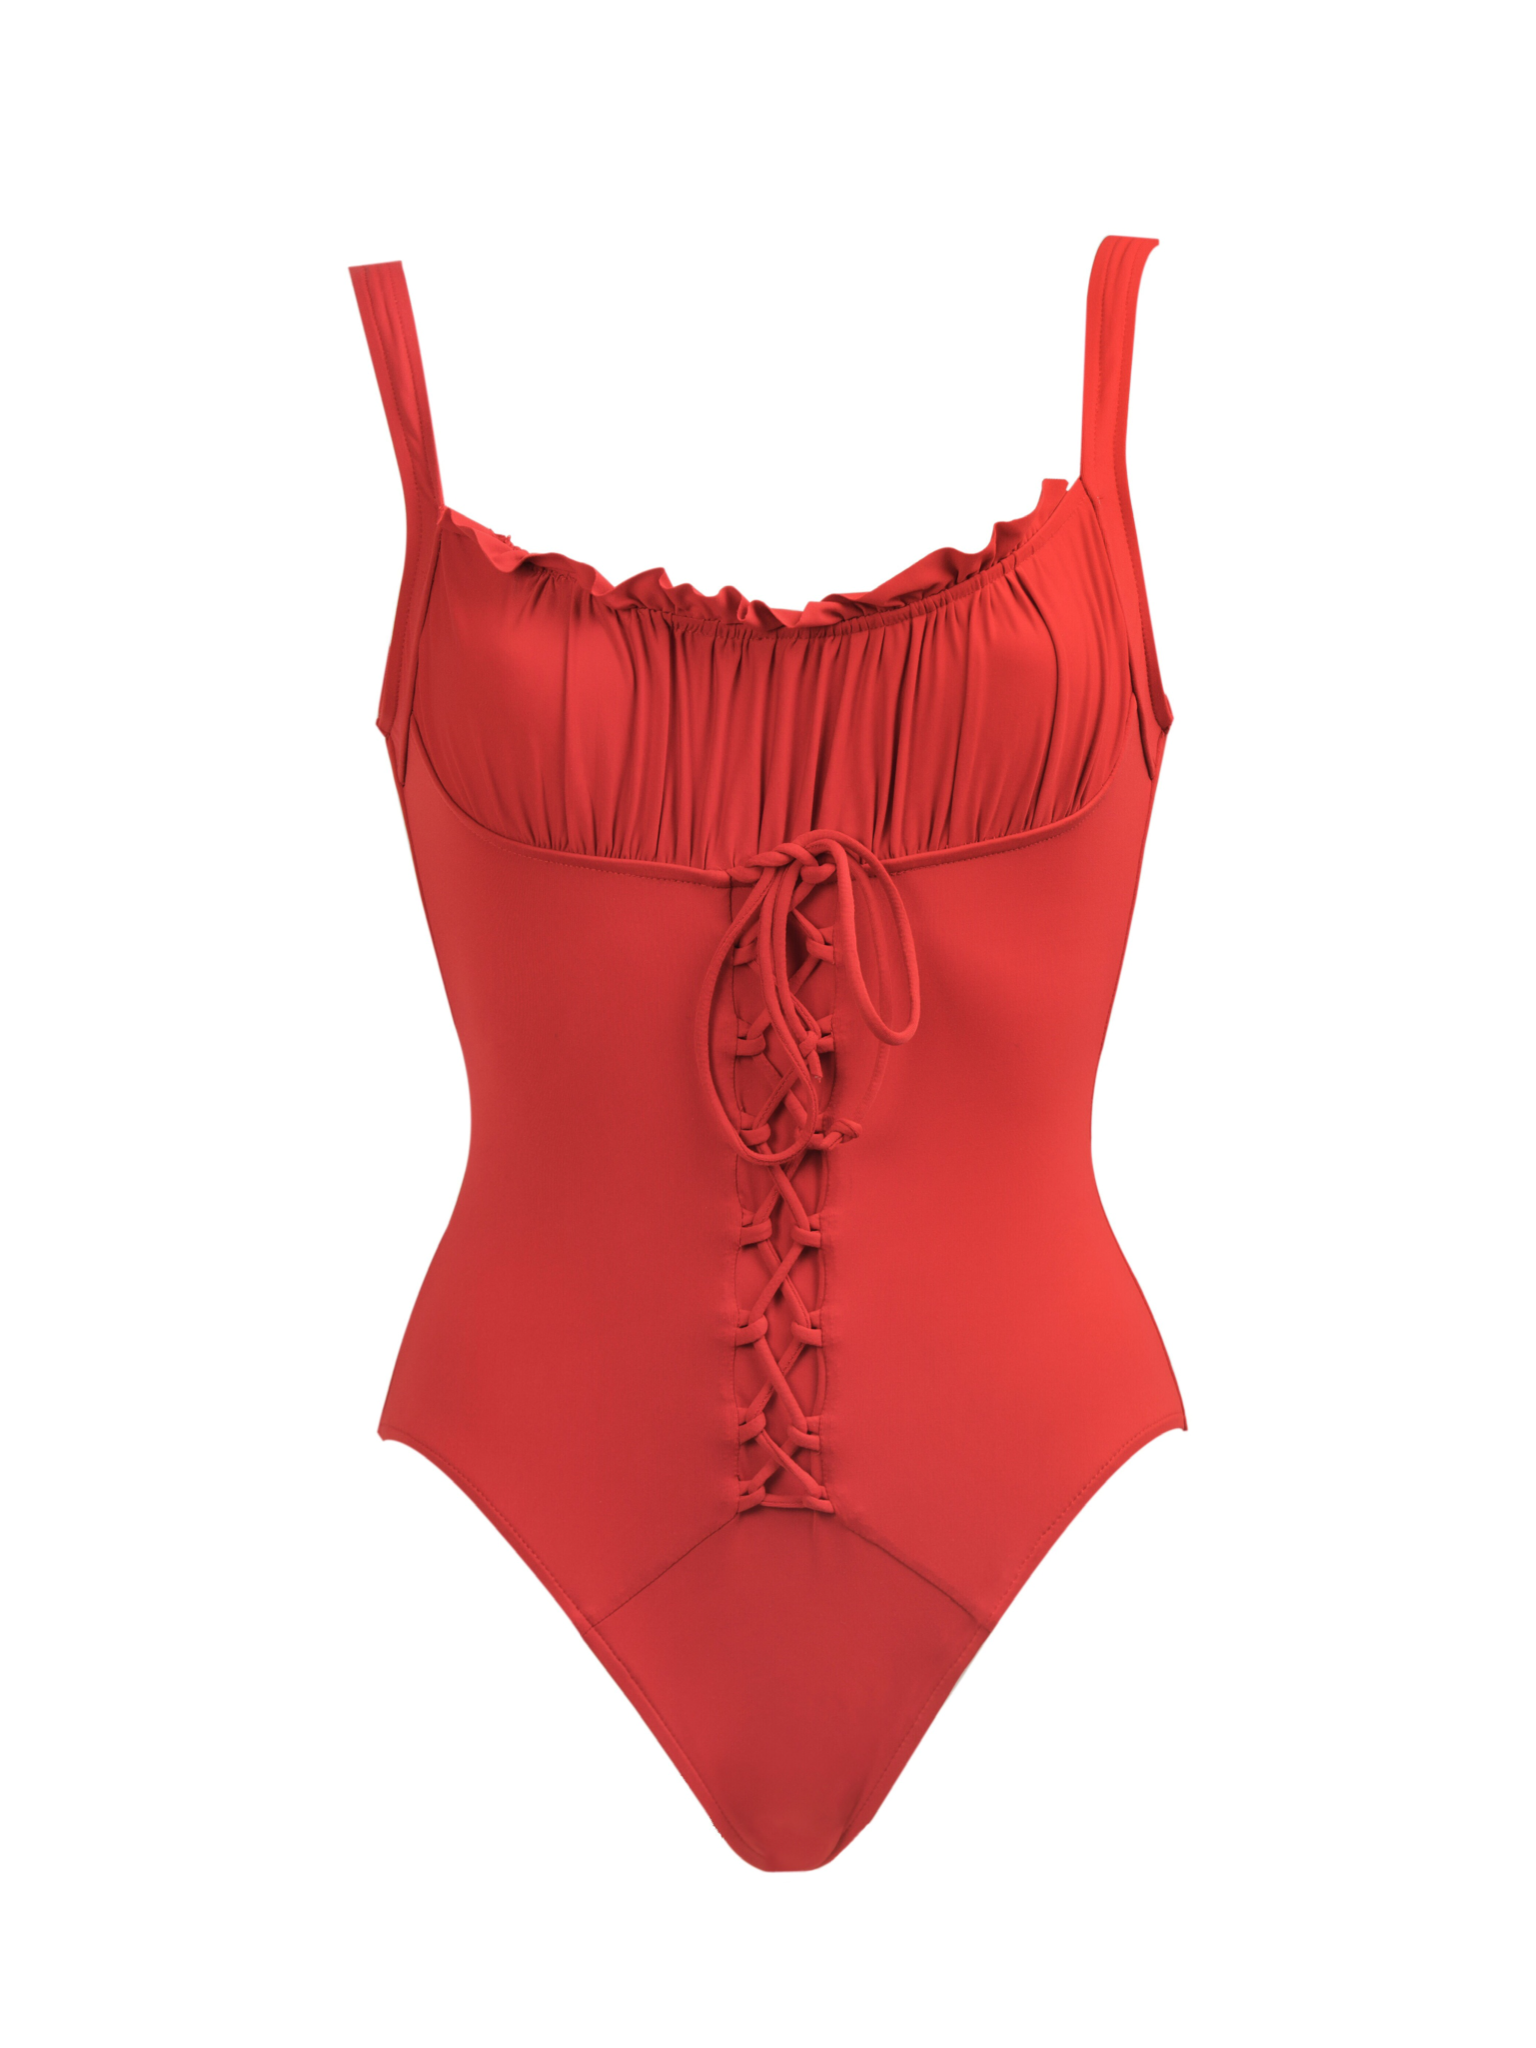 Hot Red Swimsuits | Oye! Times